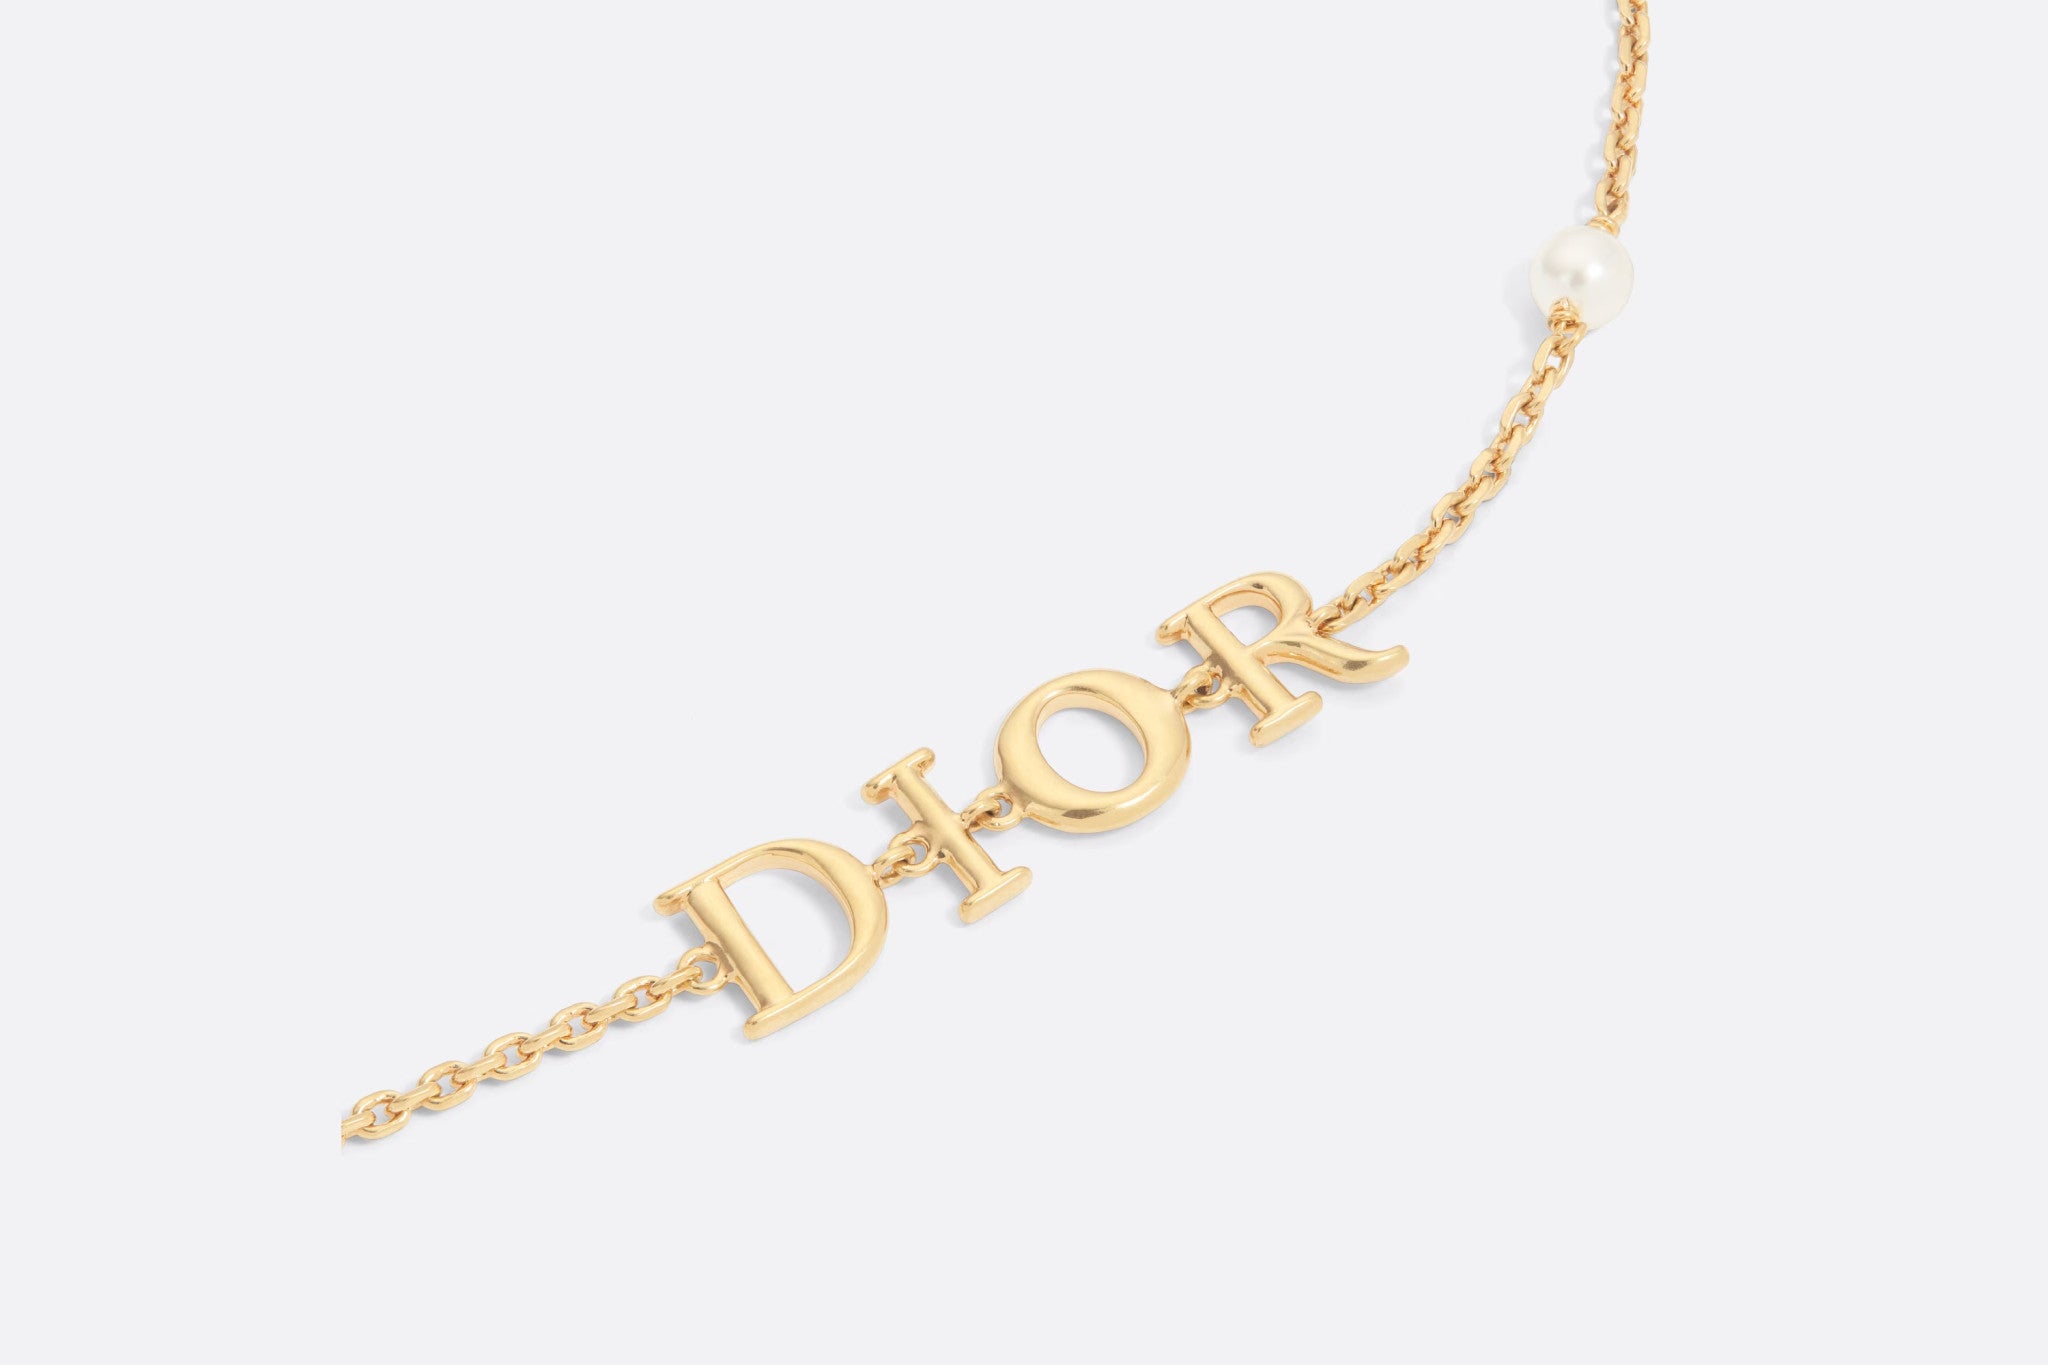 Diorevolution Necklace Goldfinish Metal and White Crystals